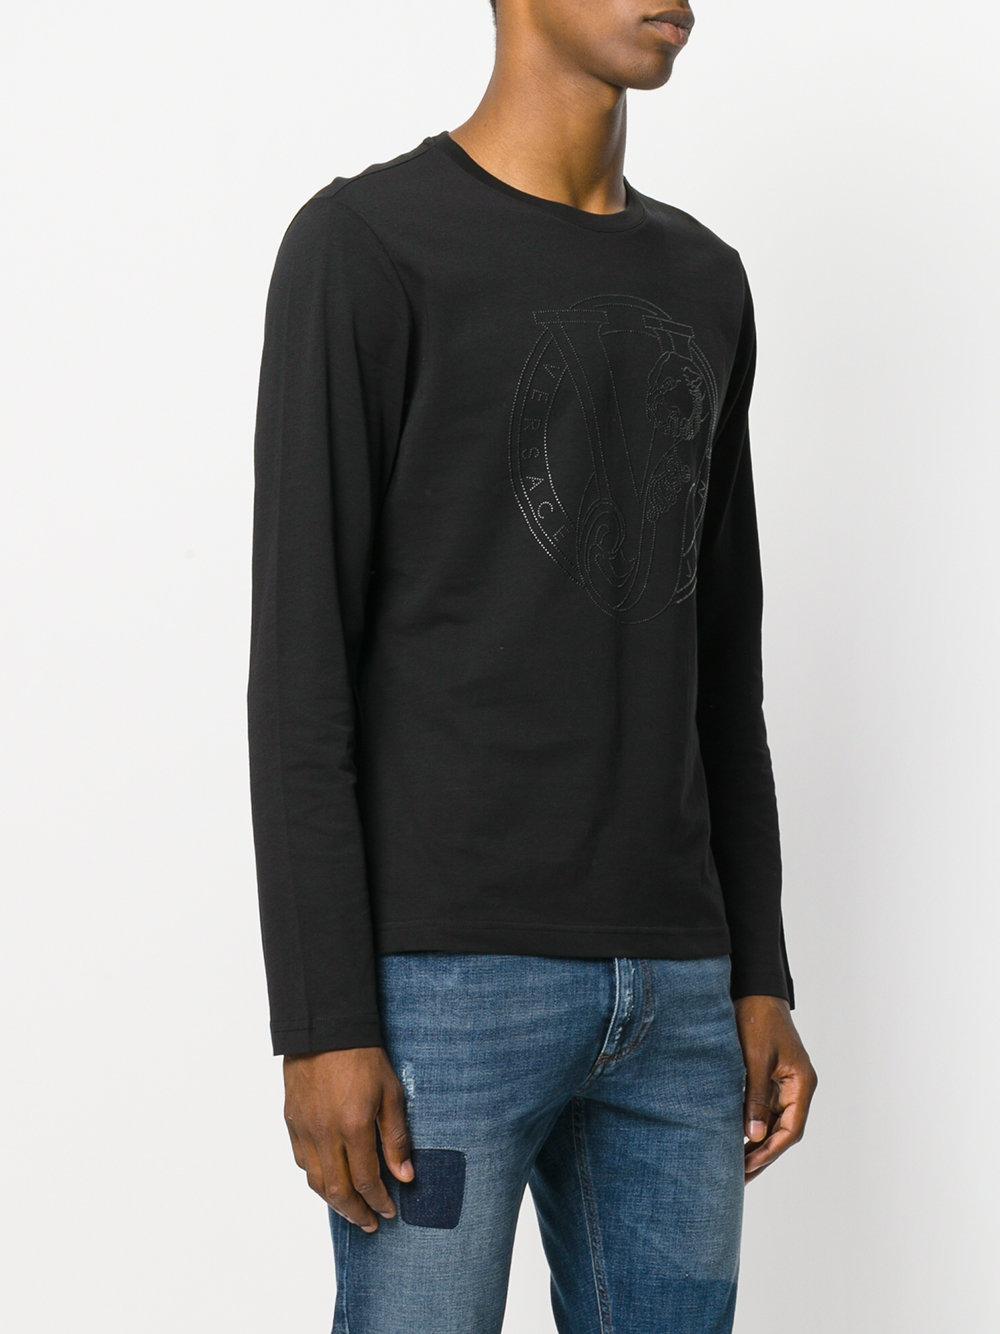 Lyst - Versace jeans Tiger Logo Sweater in Black for Men